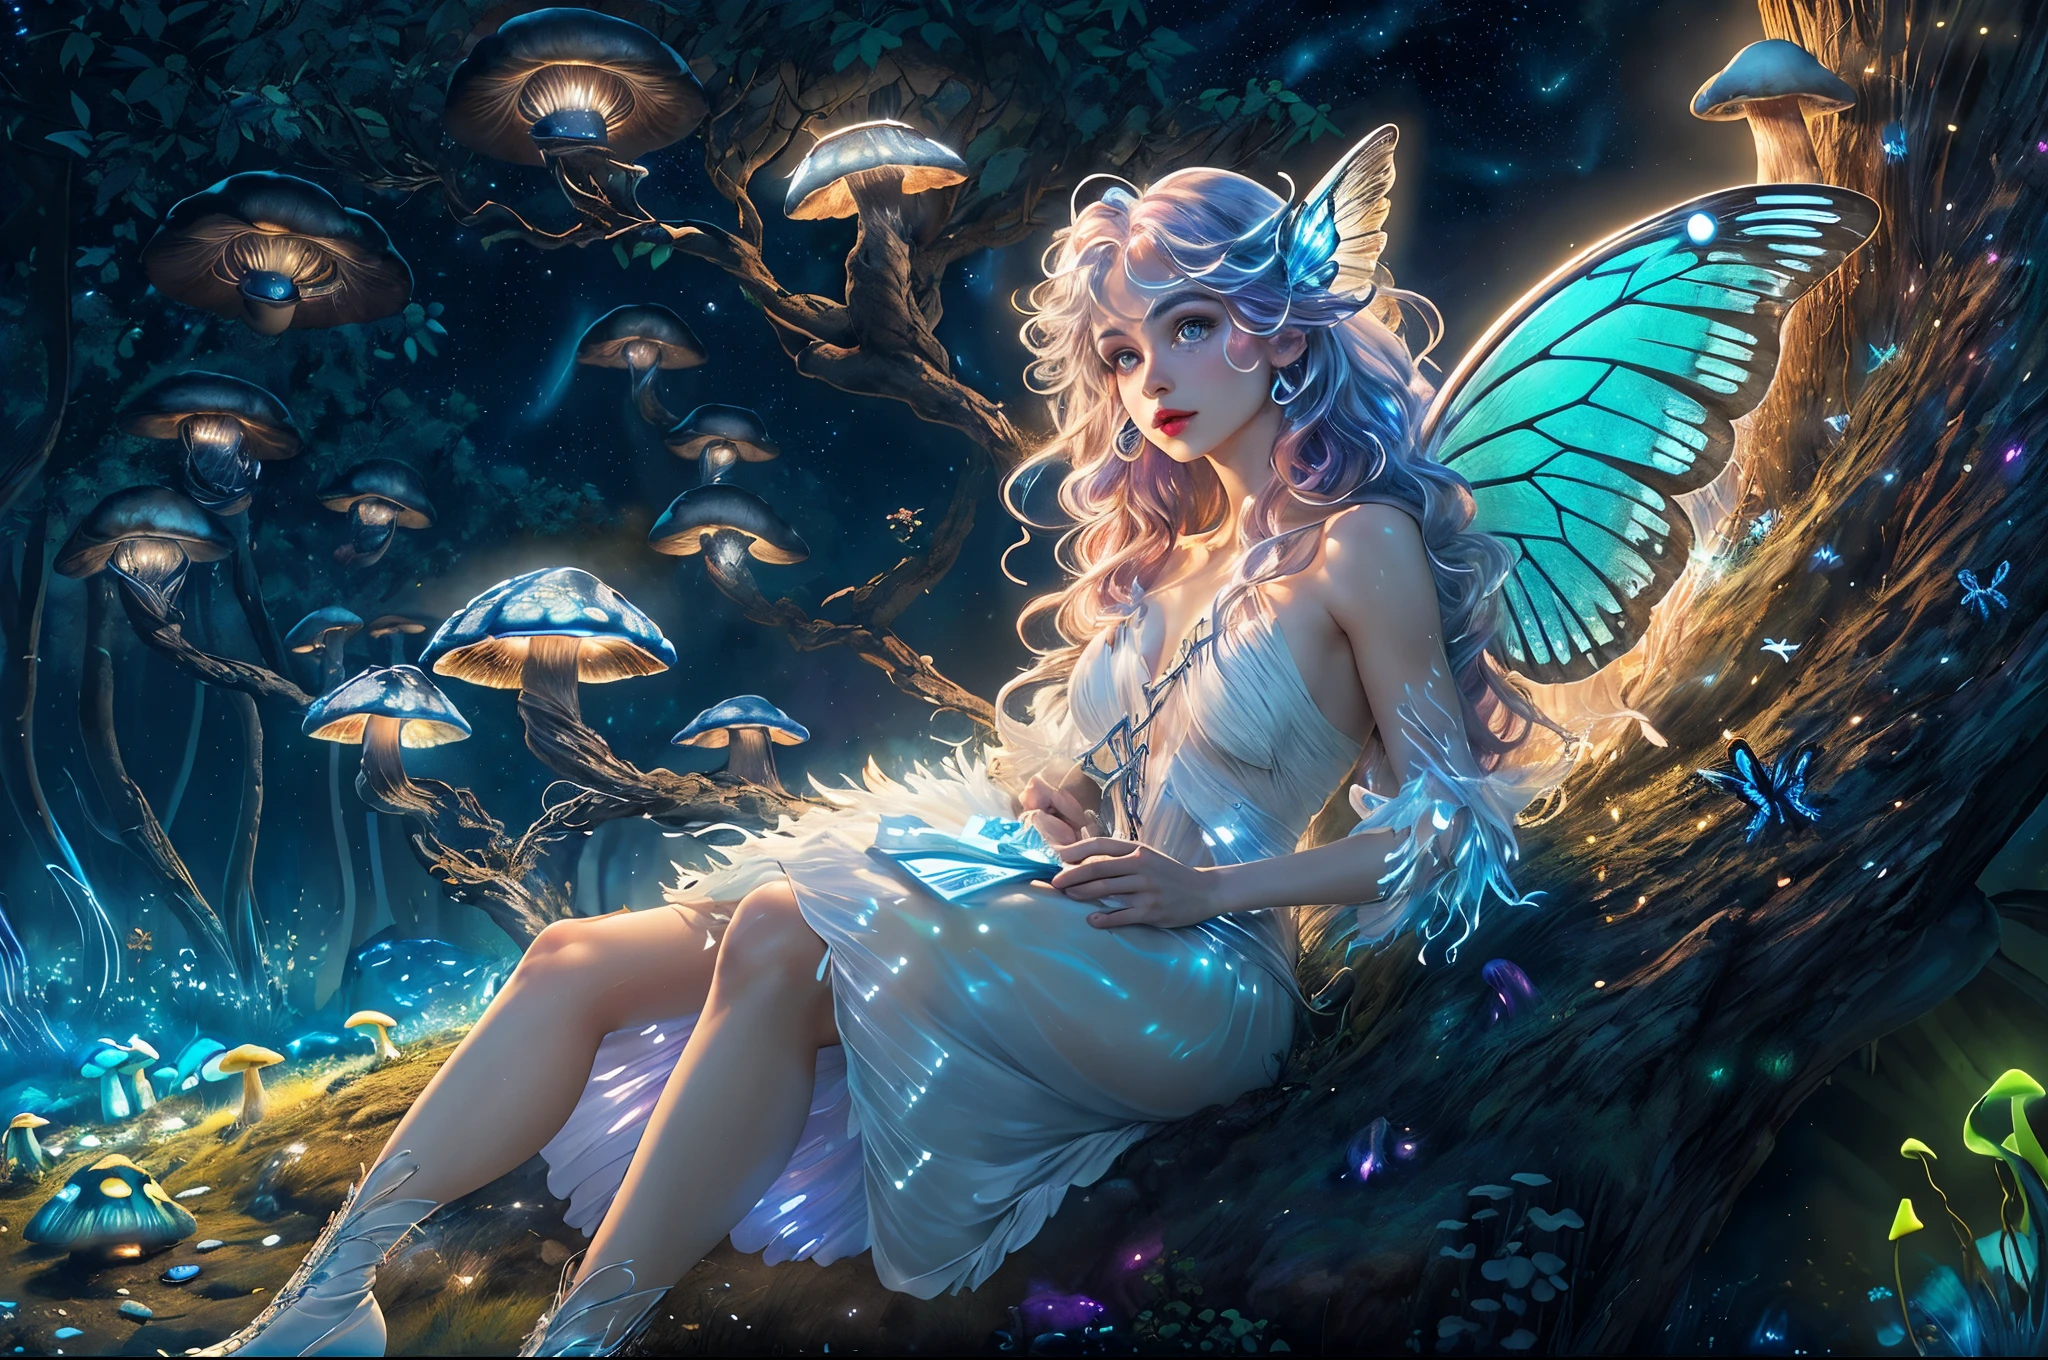 A picture of an exquisite and beautiful female fairy sitting on (bioluminescent mushrooms: 1.4)  Under the starry night sky in the forest, dynamic angle (ultra - detailed, tmasterpiece, Best quality at best), Ultra-detailed face (ultra - detailed, tmasterpiece, Best quality at best), Hyper-feminine, fare skin, with pink hair, curlies, Dynamic eye color, glowing light eyes, Sharp eyes, Redlip, wears a white dress, elegant silk dress (ultra - detailed, tmasterpiece, Best quality at best), butterfly wings (ultra - detailed, tmasterpiece, Best quality at best), Wear high-heeled boots, Phosphorescent Bioluminescent Mushrooms, Starry sky background, themoon, Beat details, Best quality at best, 8K, [ultra - detailed], tmasterpiece, Best quality at best, (ultra - detailed), full bodyesbian, super wide shot, photo-realism, Fantasyart, GL0W1NGR,